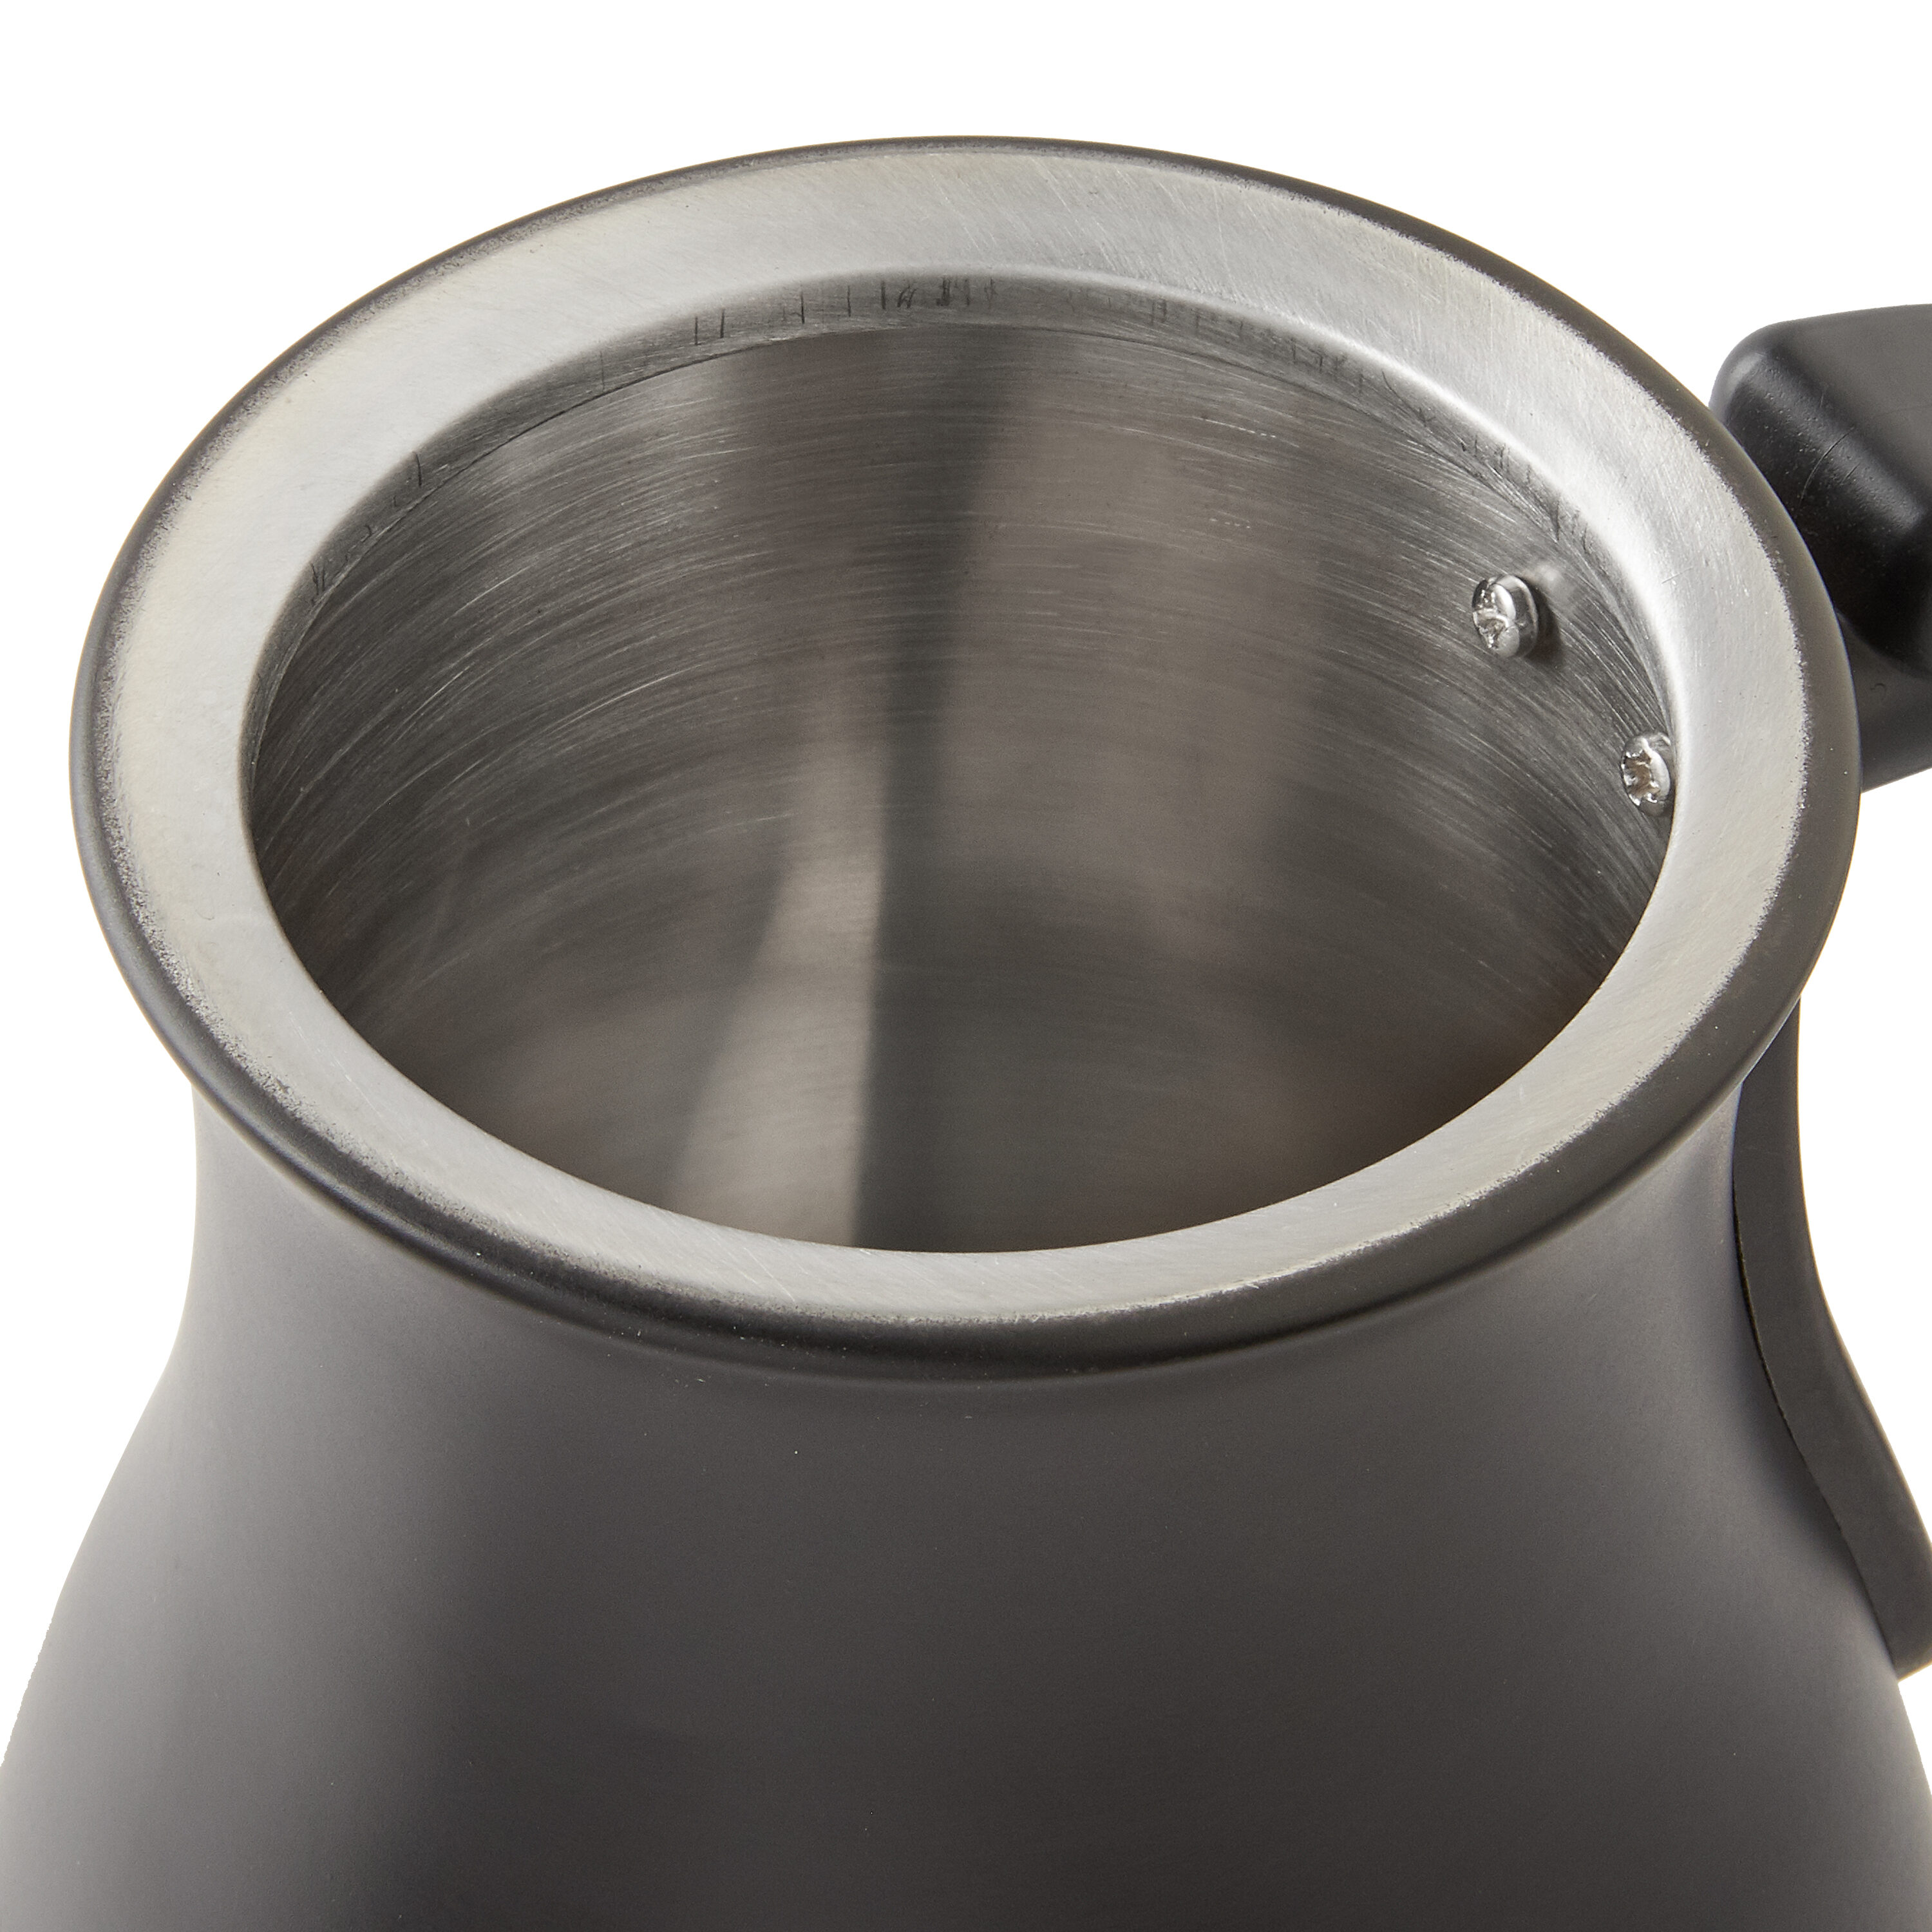 1L /1.5L/2L Teapot Stainless Steel Coffee Tea Kettle With Infuser Filter  black Oolong Tea